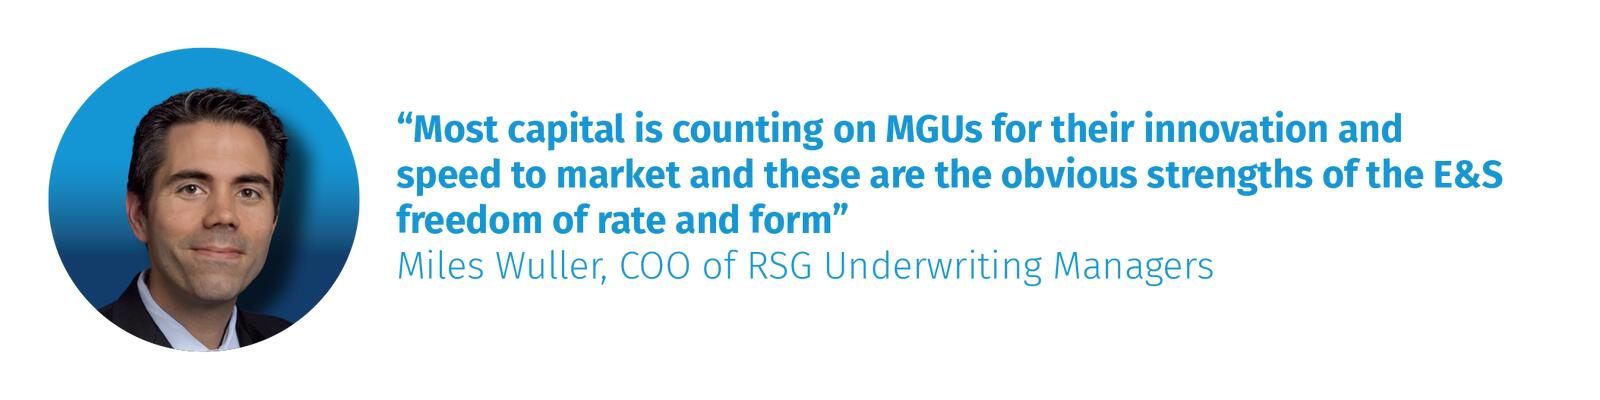 “Most capital is counting on MGUs for their innovation and speed to market and these are the obvious strengths of the E&S freedom of rate and form” Miles Wuller, COO of RSG Underwriting Managers